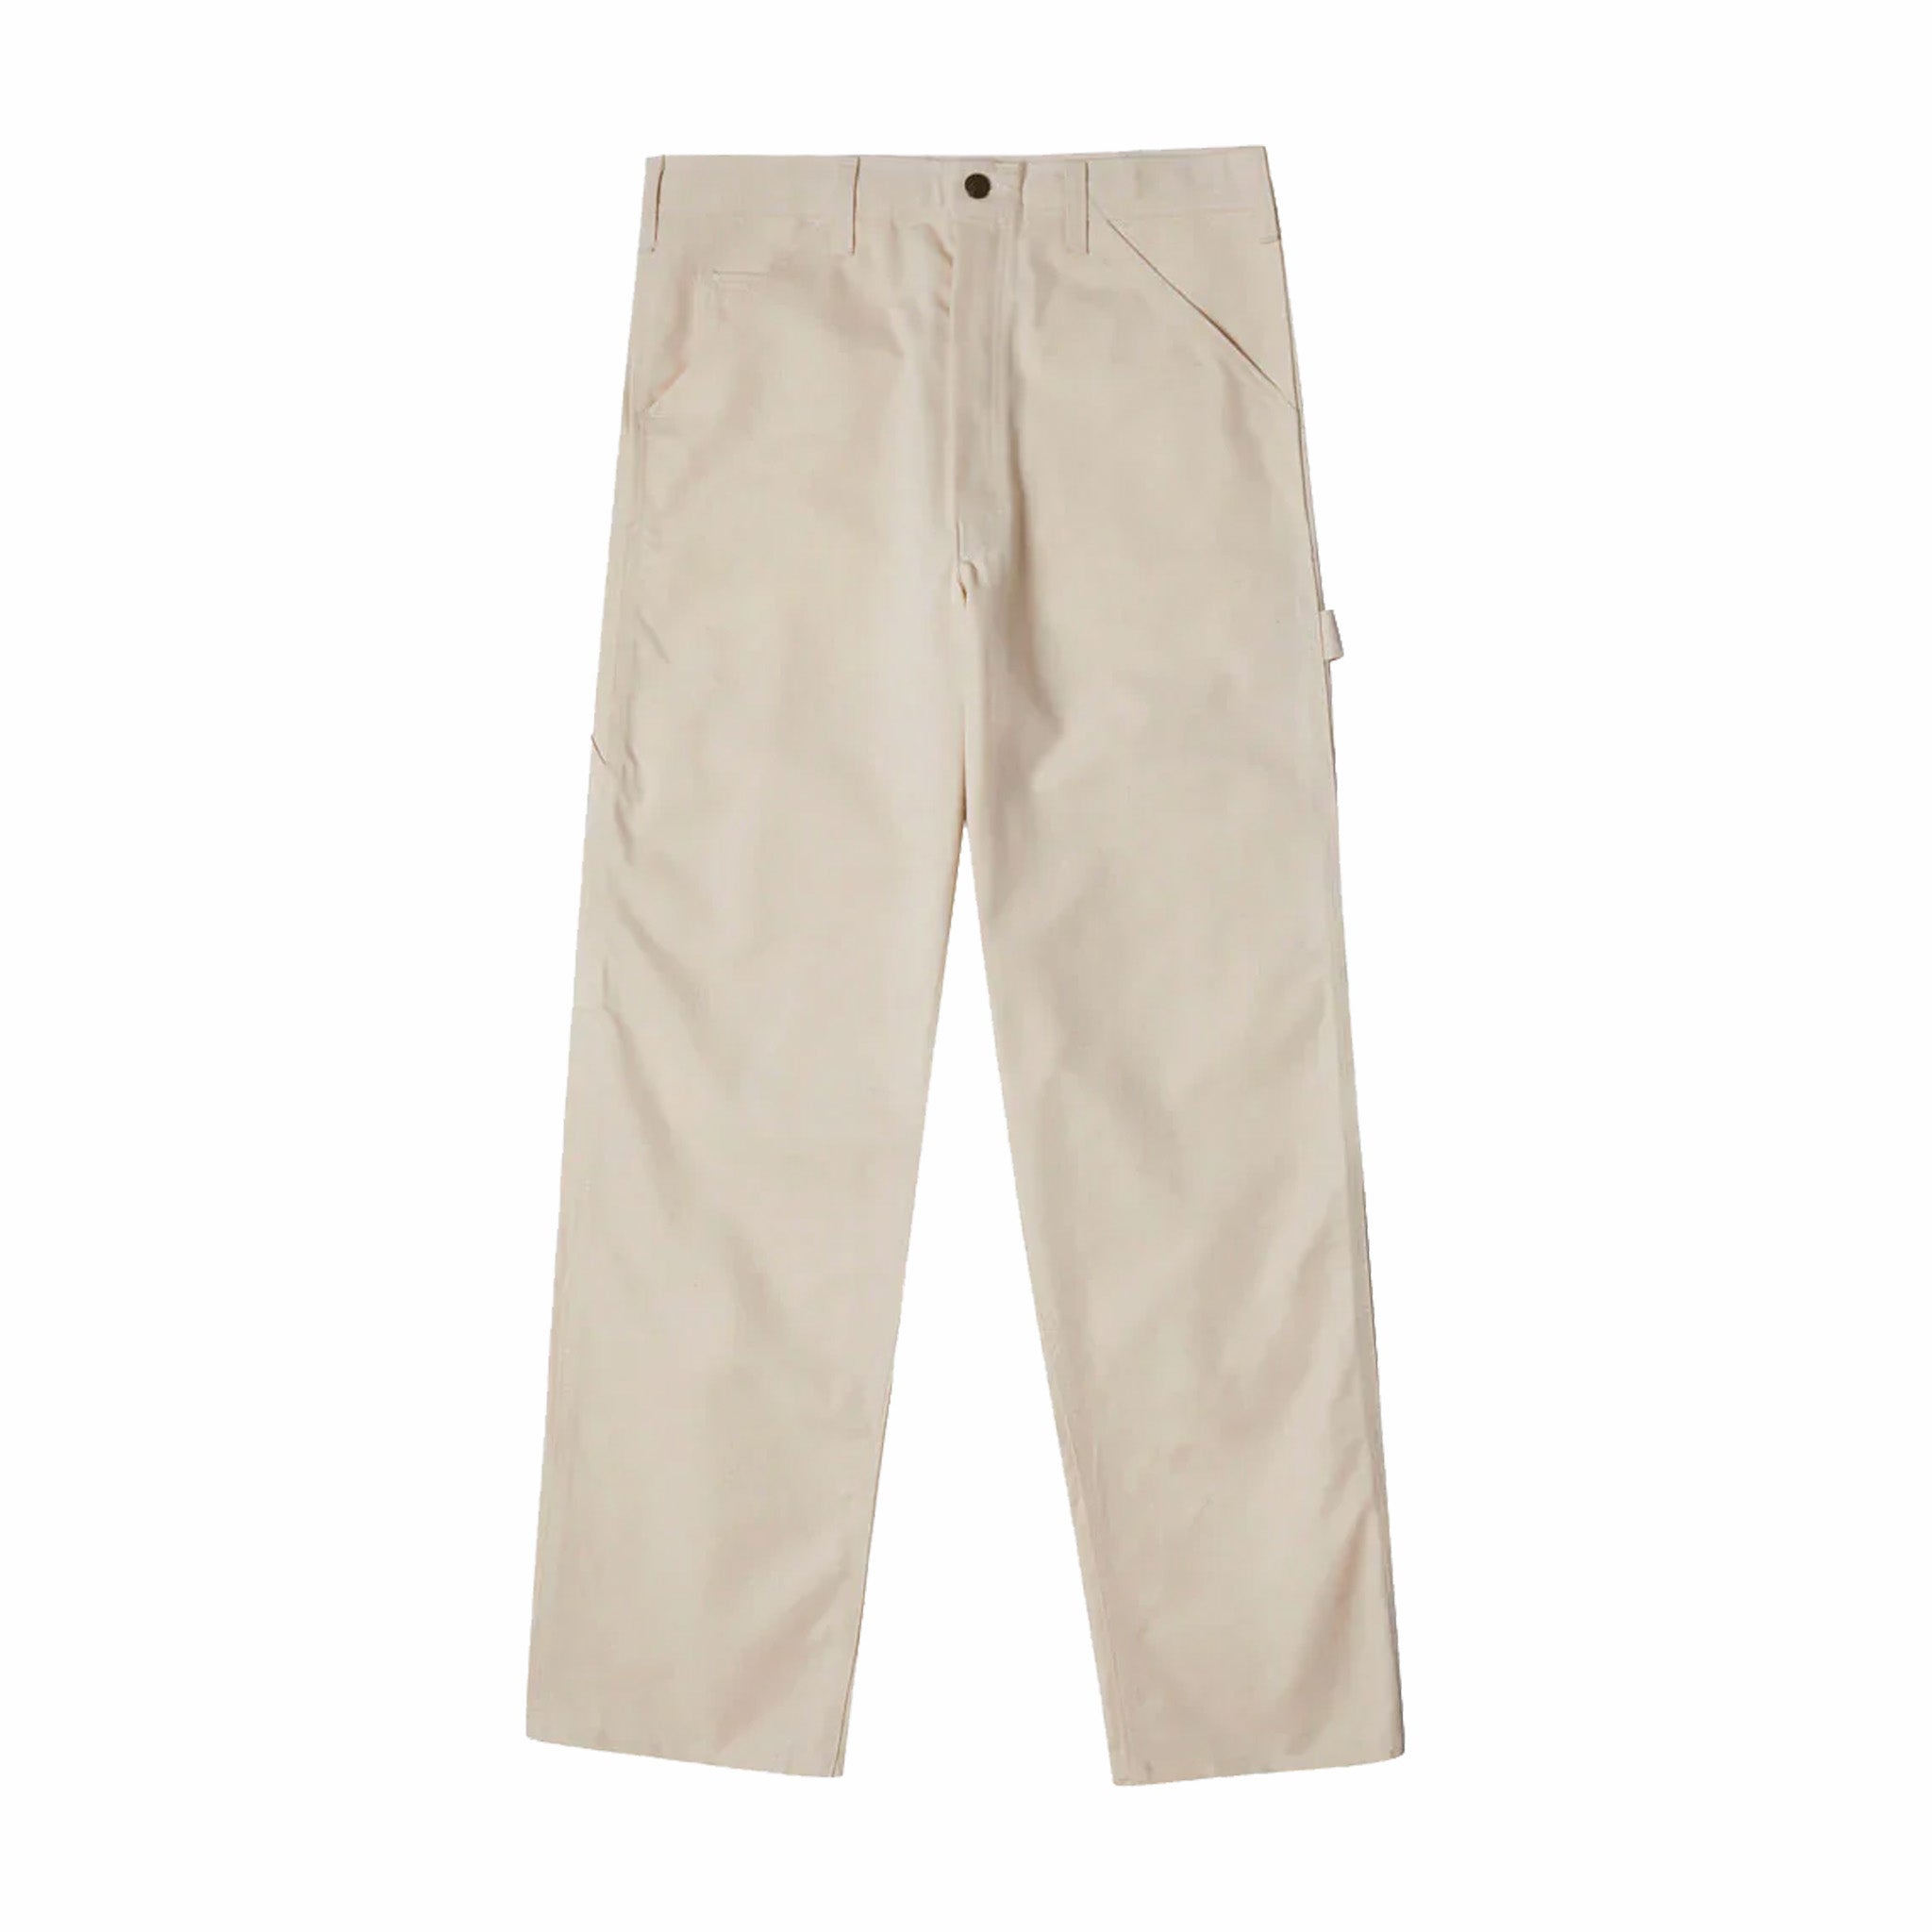 Stan Ray Original Painter Pant 1154 (Natural Drill) - August Shop